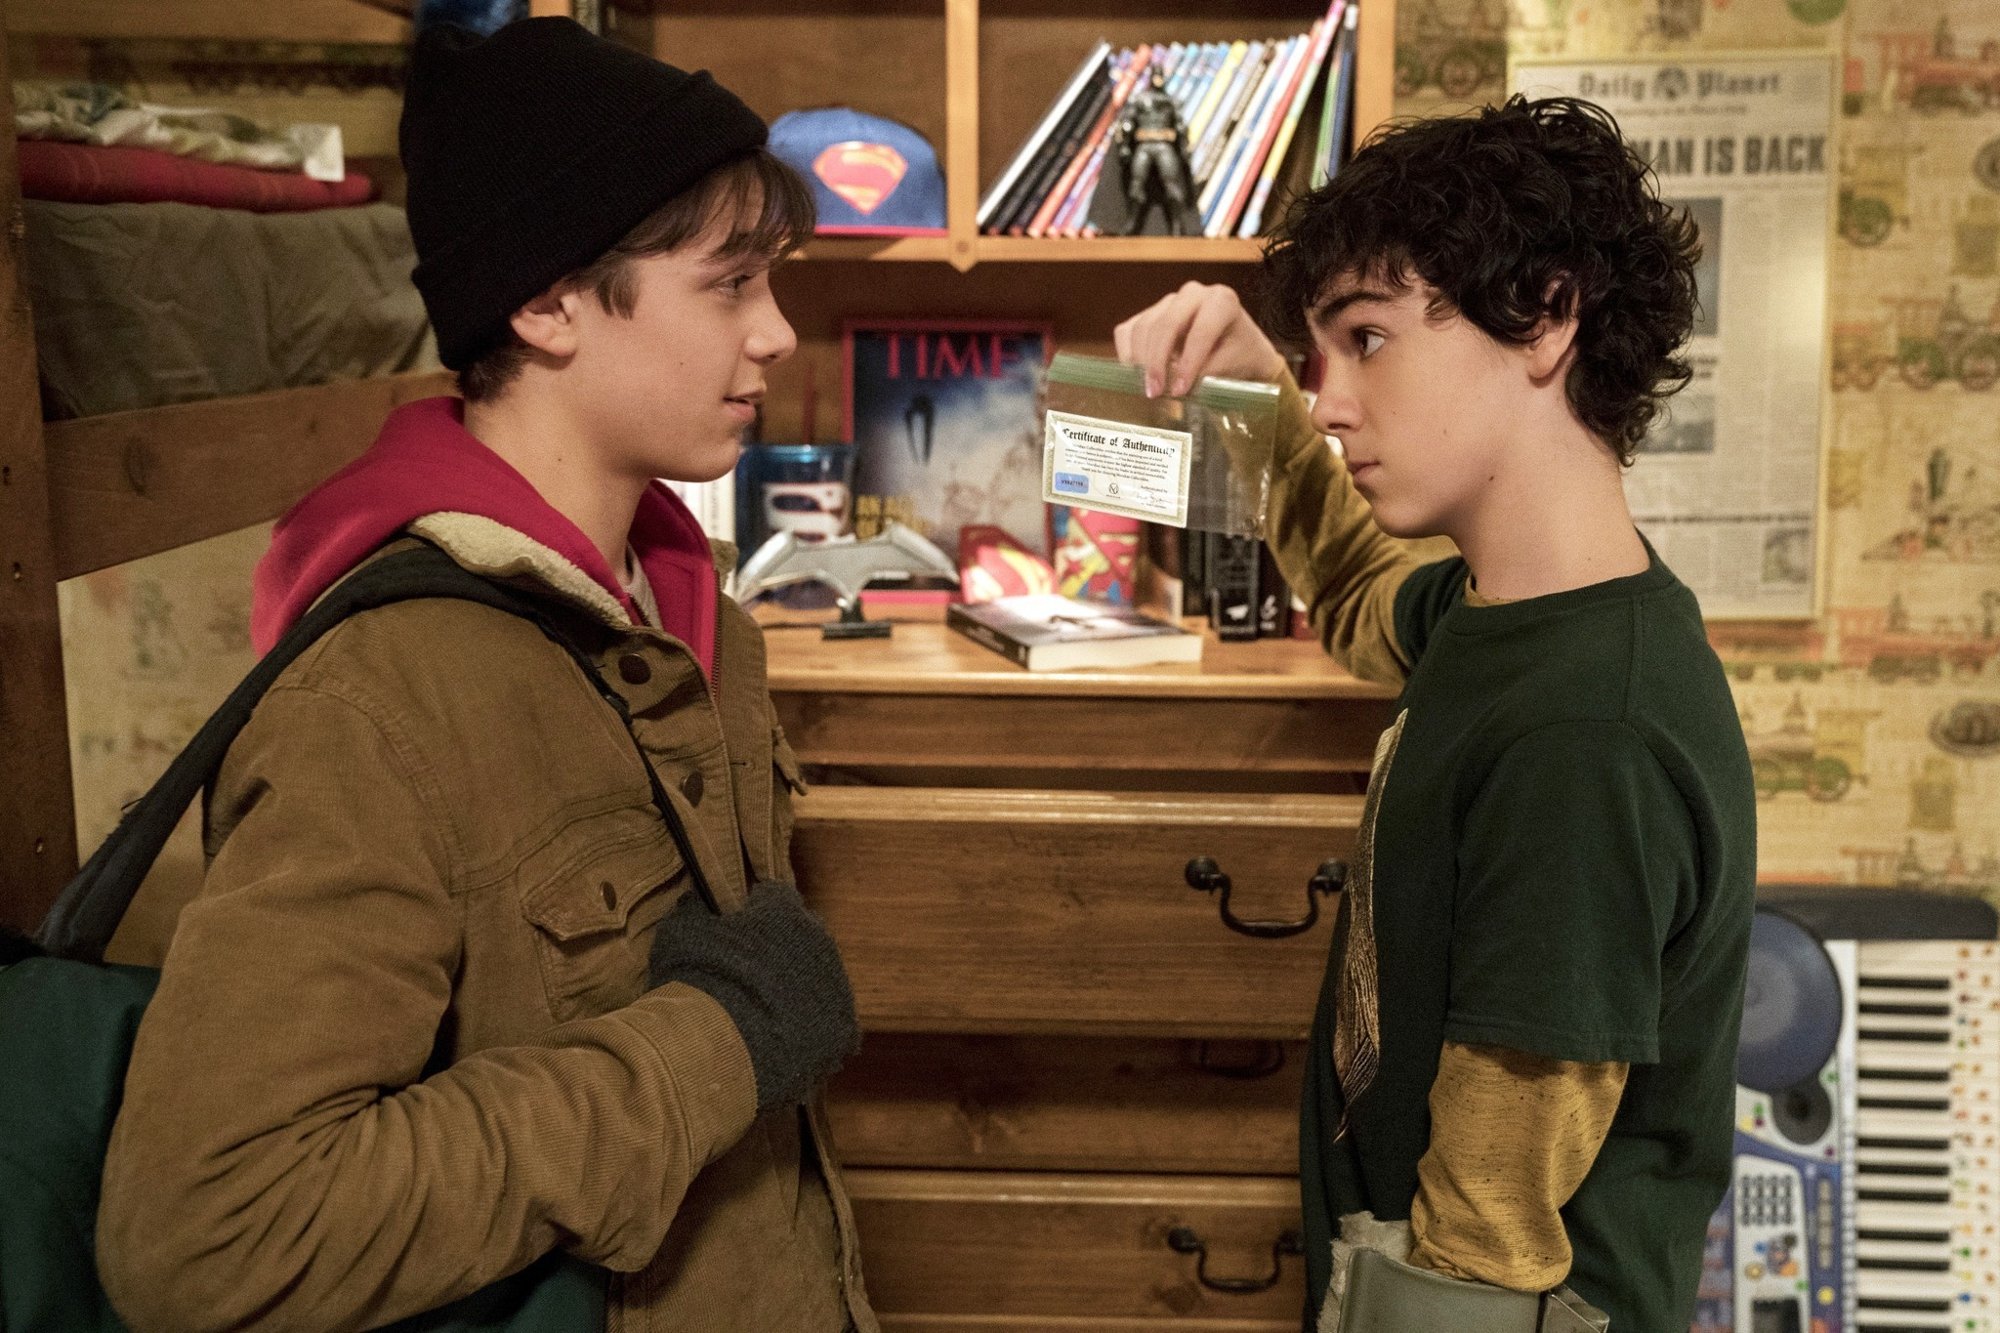 Asher Angel stars as Billy Batson and Jack Dylan Grazer stars as Freddy Freeman in Warner Bros. Pictures' Shazam! (2019)